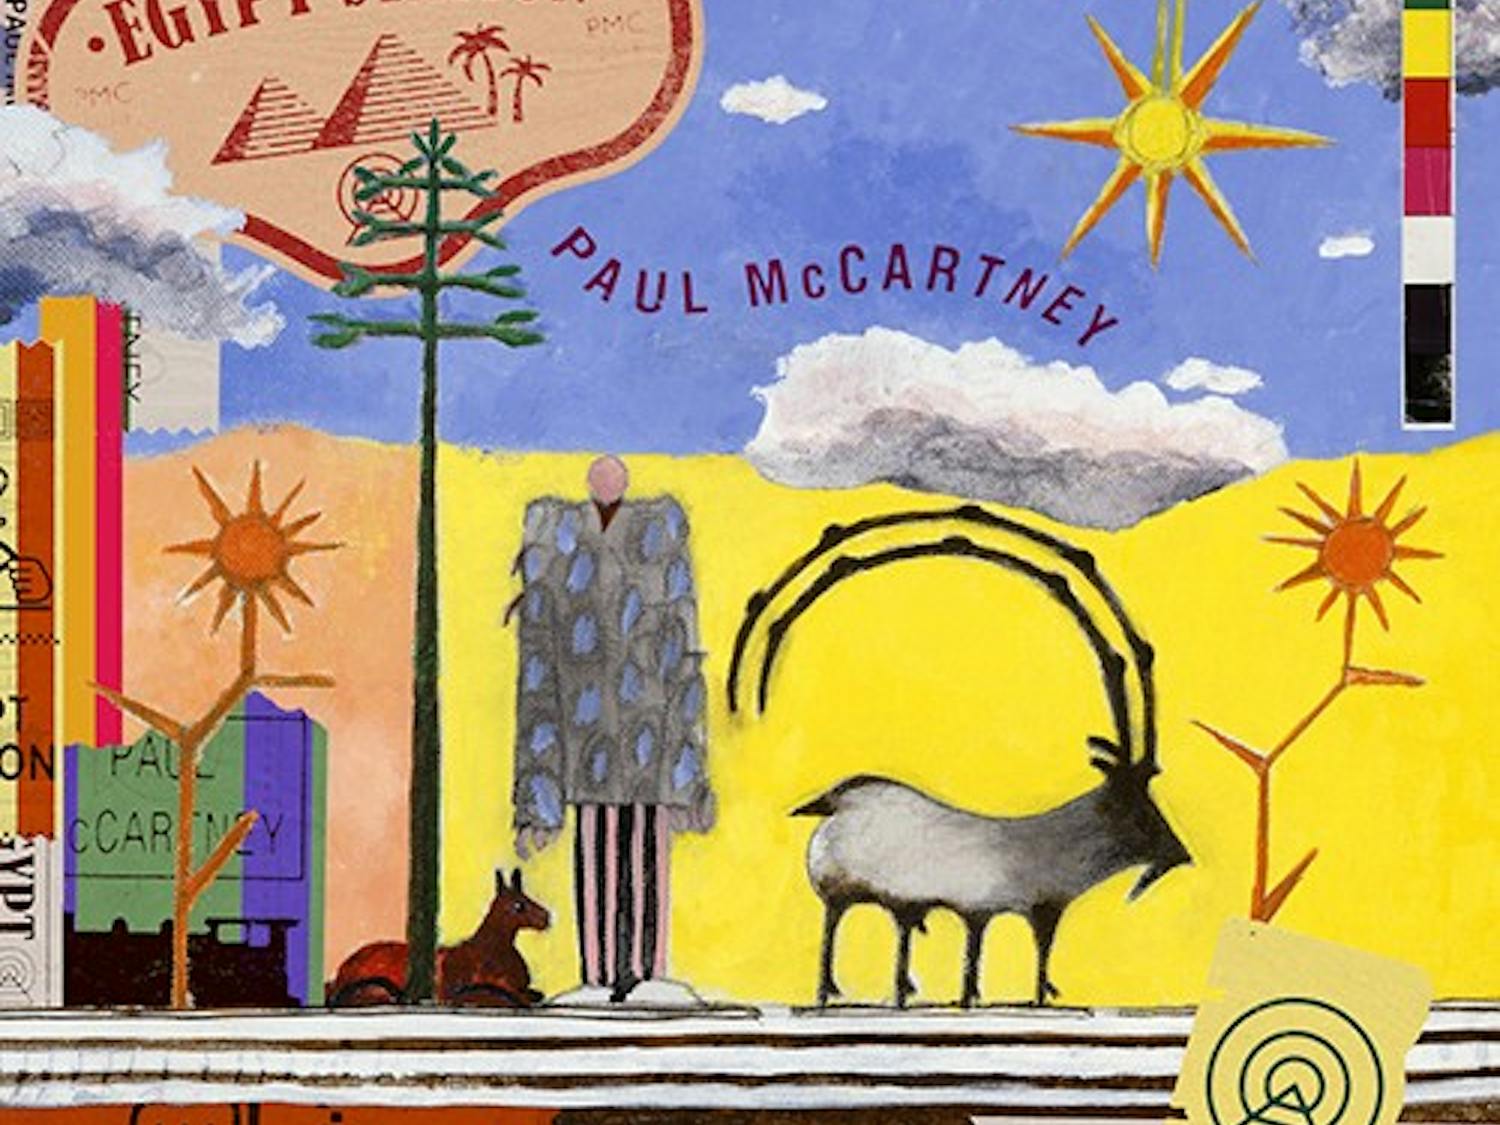 &nbsp;With “Egypt Station,” Paul McCartney revisits past glories with a fresh sound. The album makes use of famed producer Greg Kurstin, giving an eclectic take on McCartney’s usual and expected lyrical output.&nbsp;